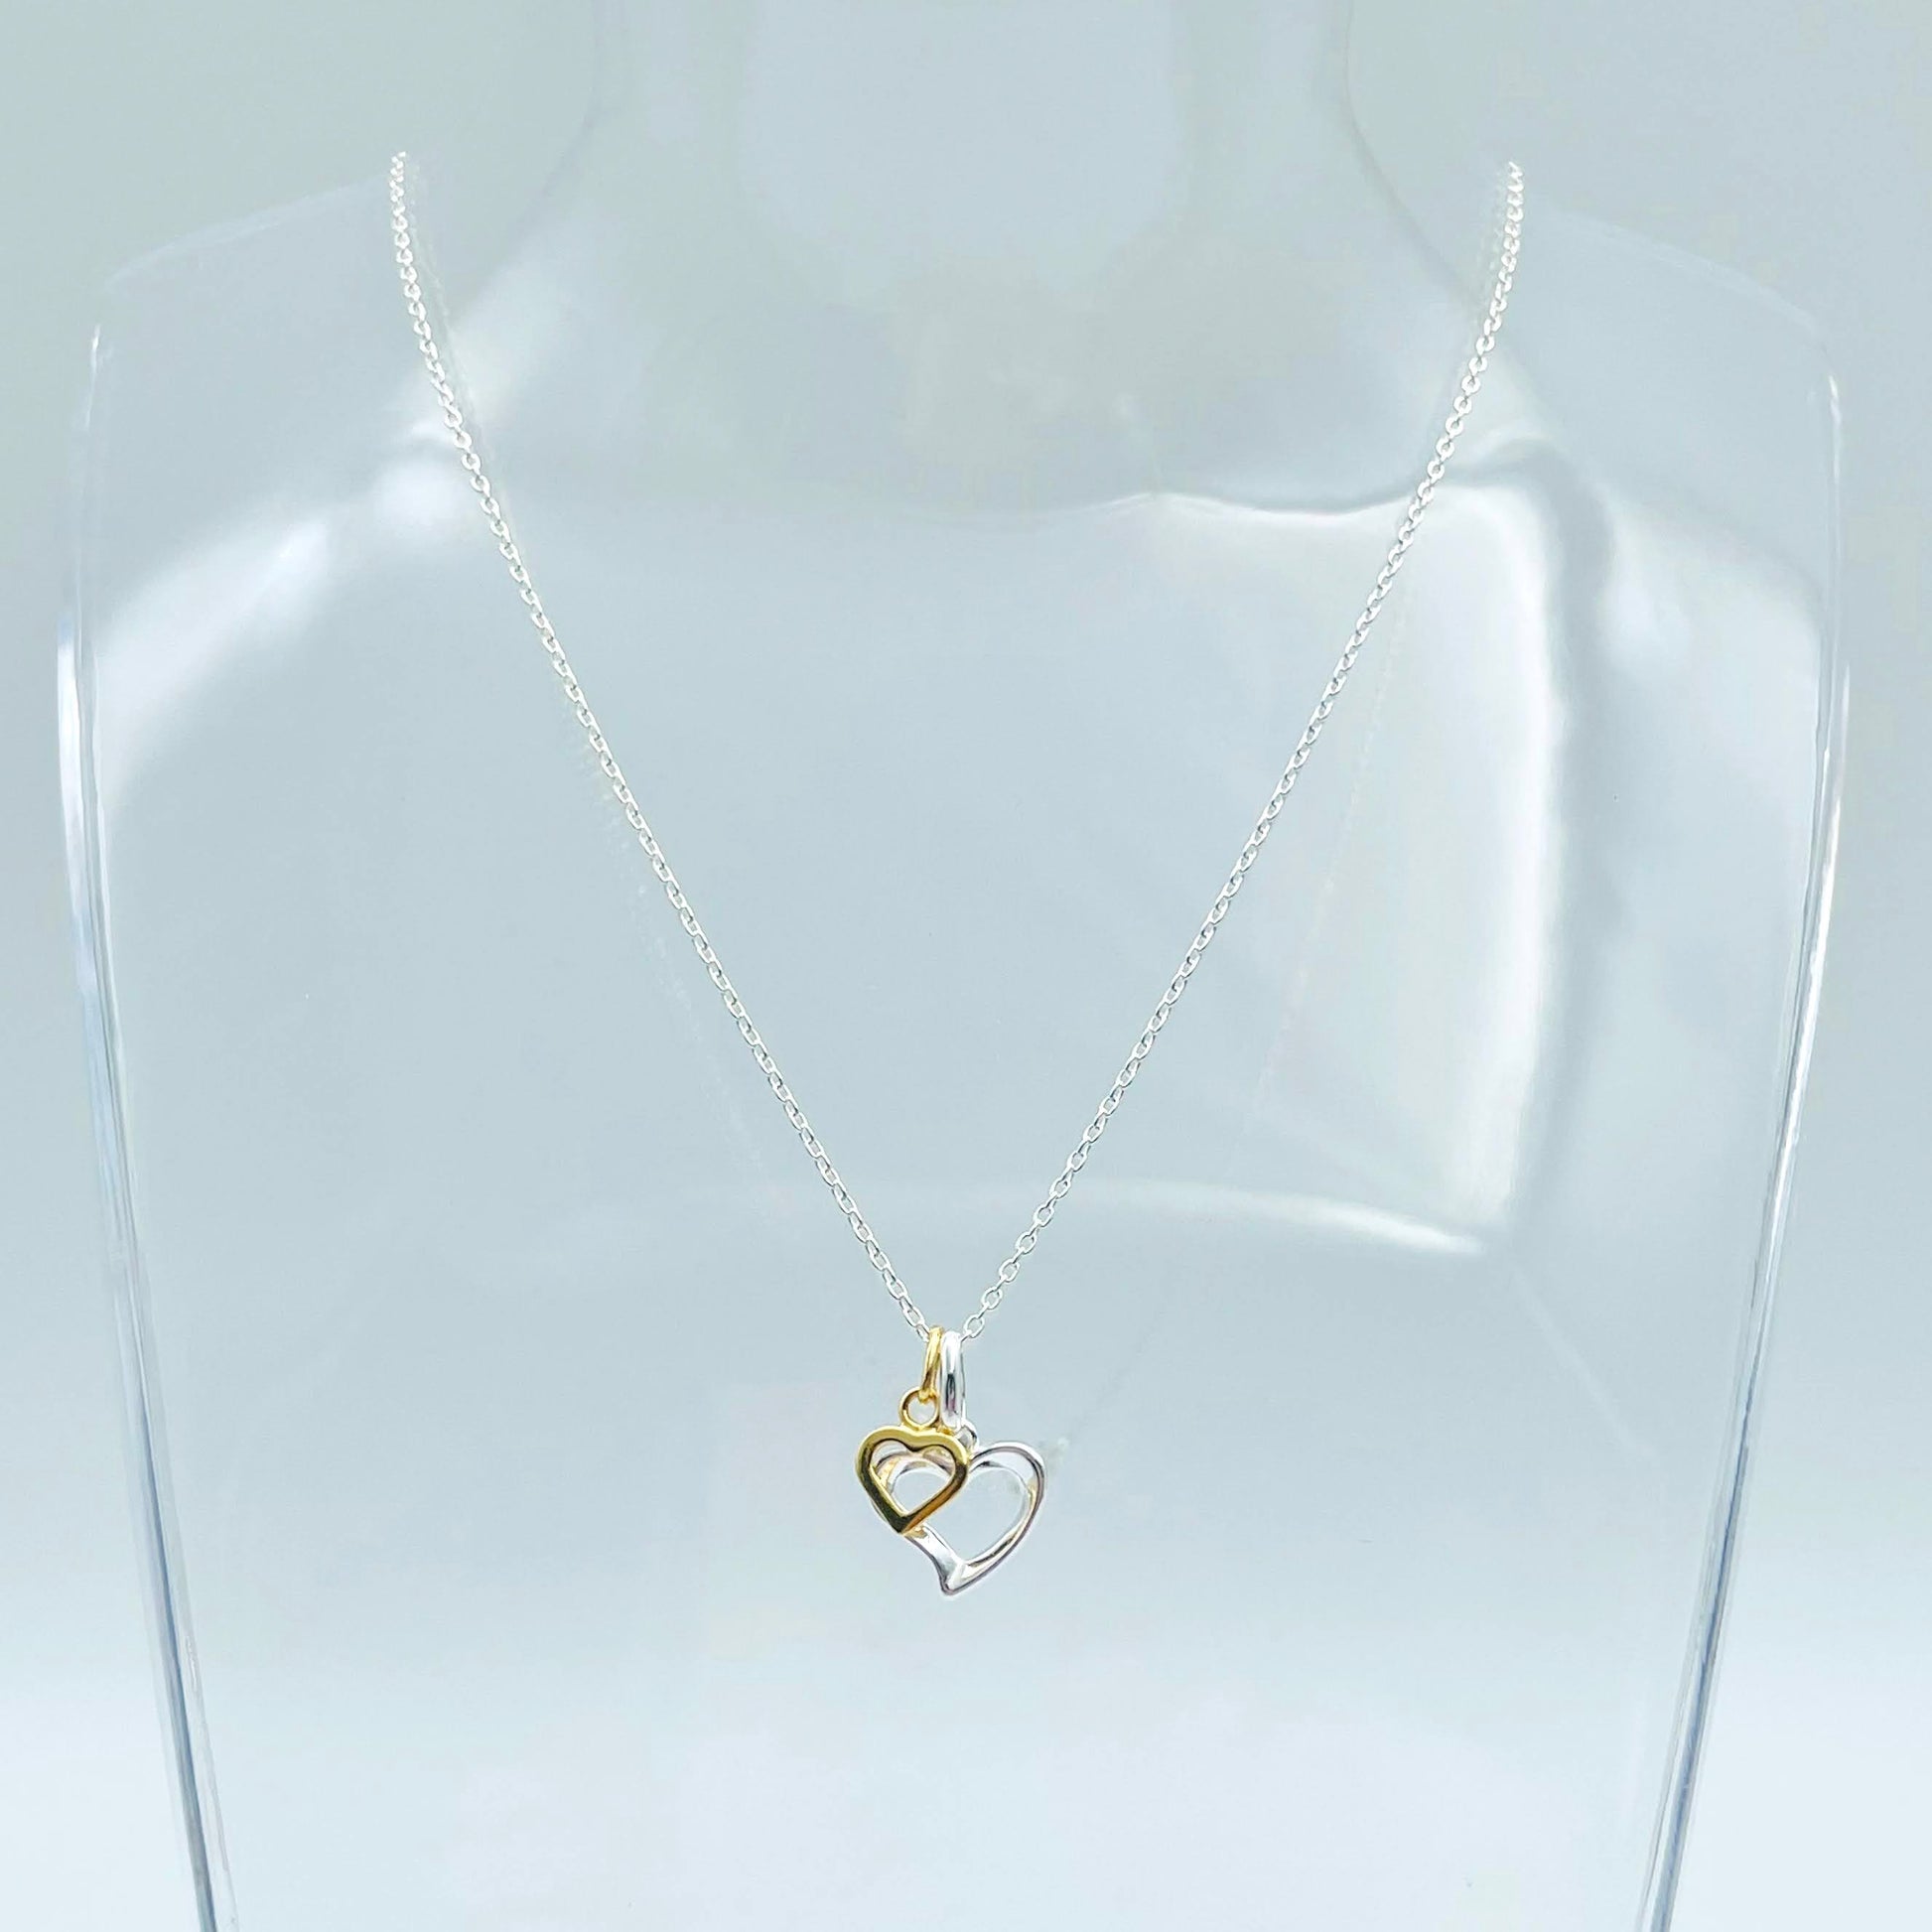 sterling silver heart and gold vermeil heart shown on 16-18" sterling silver chain. Wear them separately or together.